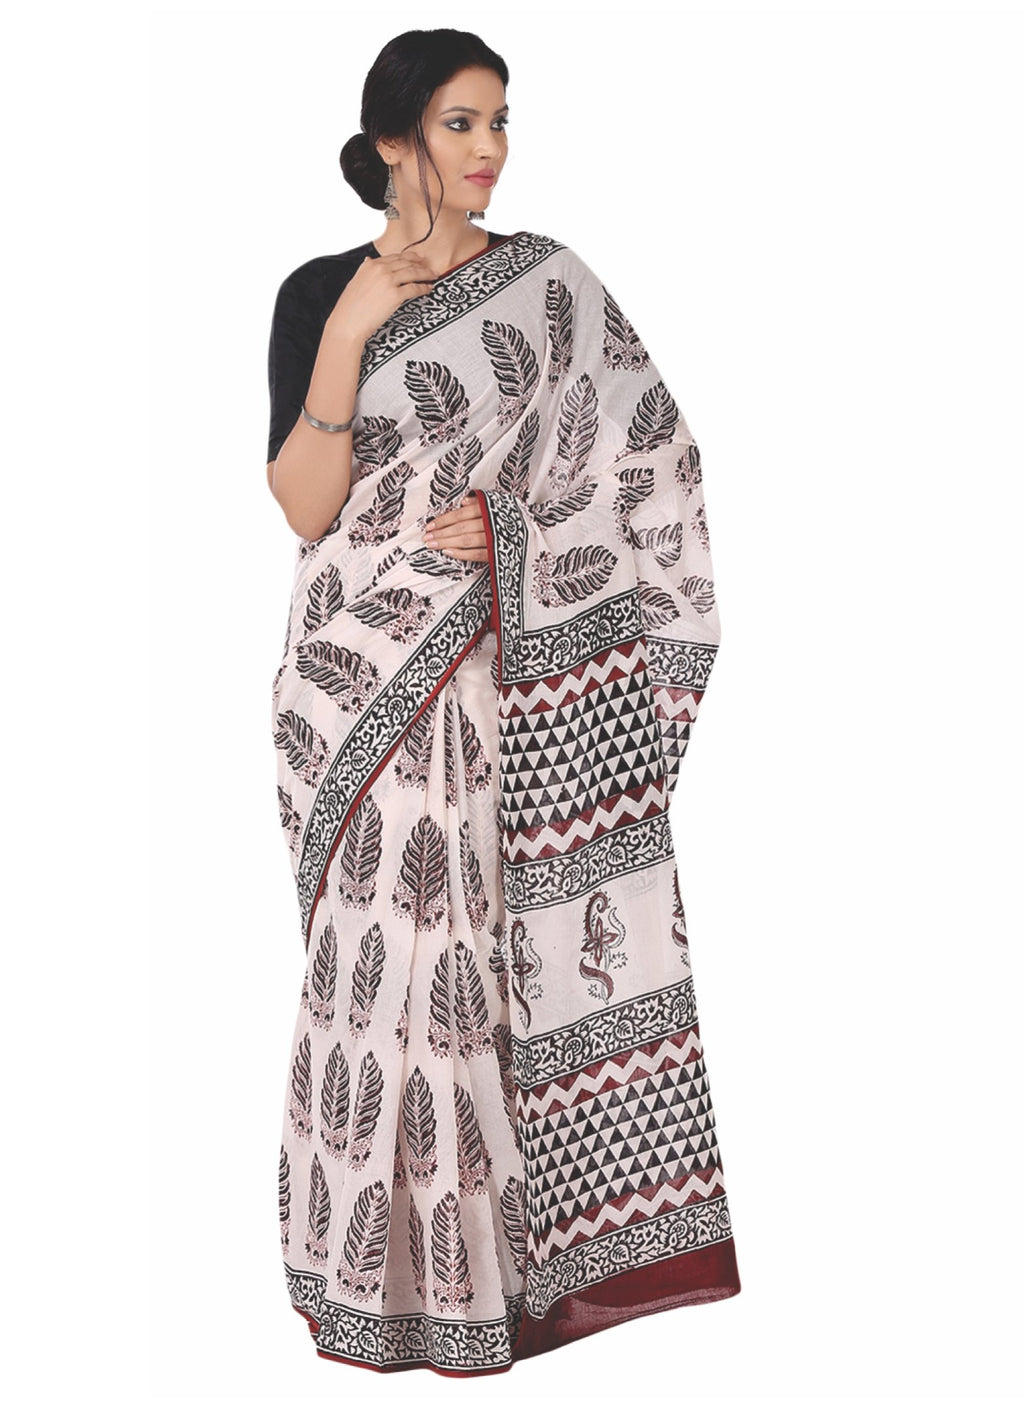 Pink & Black Hand Block Bagh Print Handcrafted Cotton Saree-Saree-Kalakari India-BAPASA0035-Bagh, Cotton, Geographical Indication, Hand Blocks, Hand Crafted, Heritage Prints, Sarees, Sustainable Fabrics-[Linen,Ethnic,wear,Fashionista,Handloom,Handicraft,Indigo,blockprint,block,print,Cotton,Chanderi,Blue, latest,classy,party,bollywood,trendy,summer,style,traditional,formal,elegant,unique,style,hand,block,print, dabu,booti,gift,present,glamorous,affordable,collectible,Sari,Saree,printed, holi, Diw